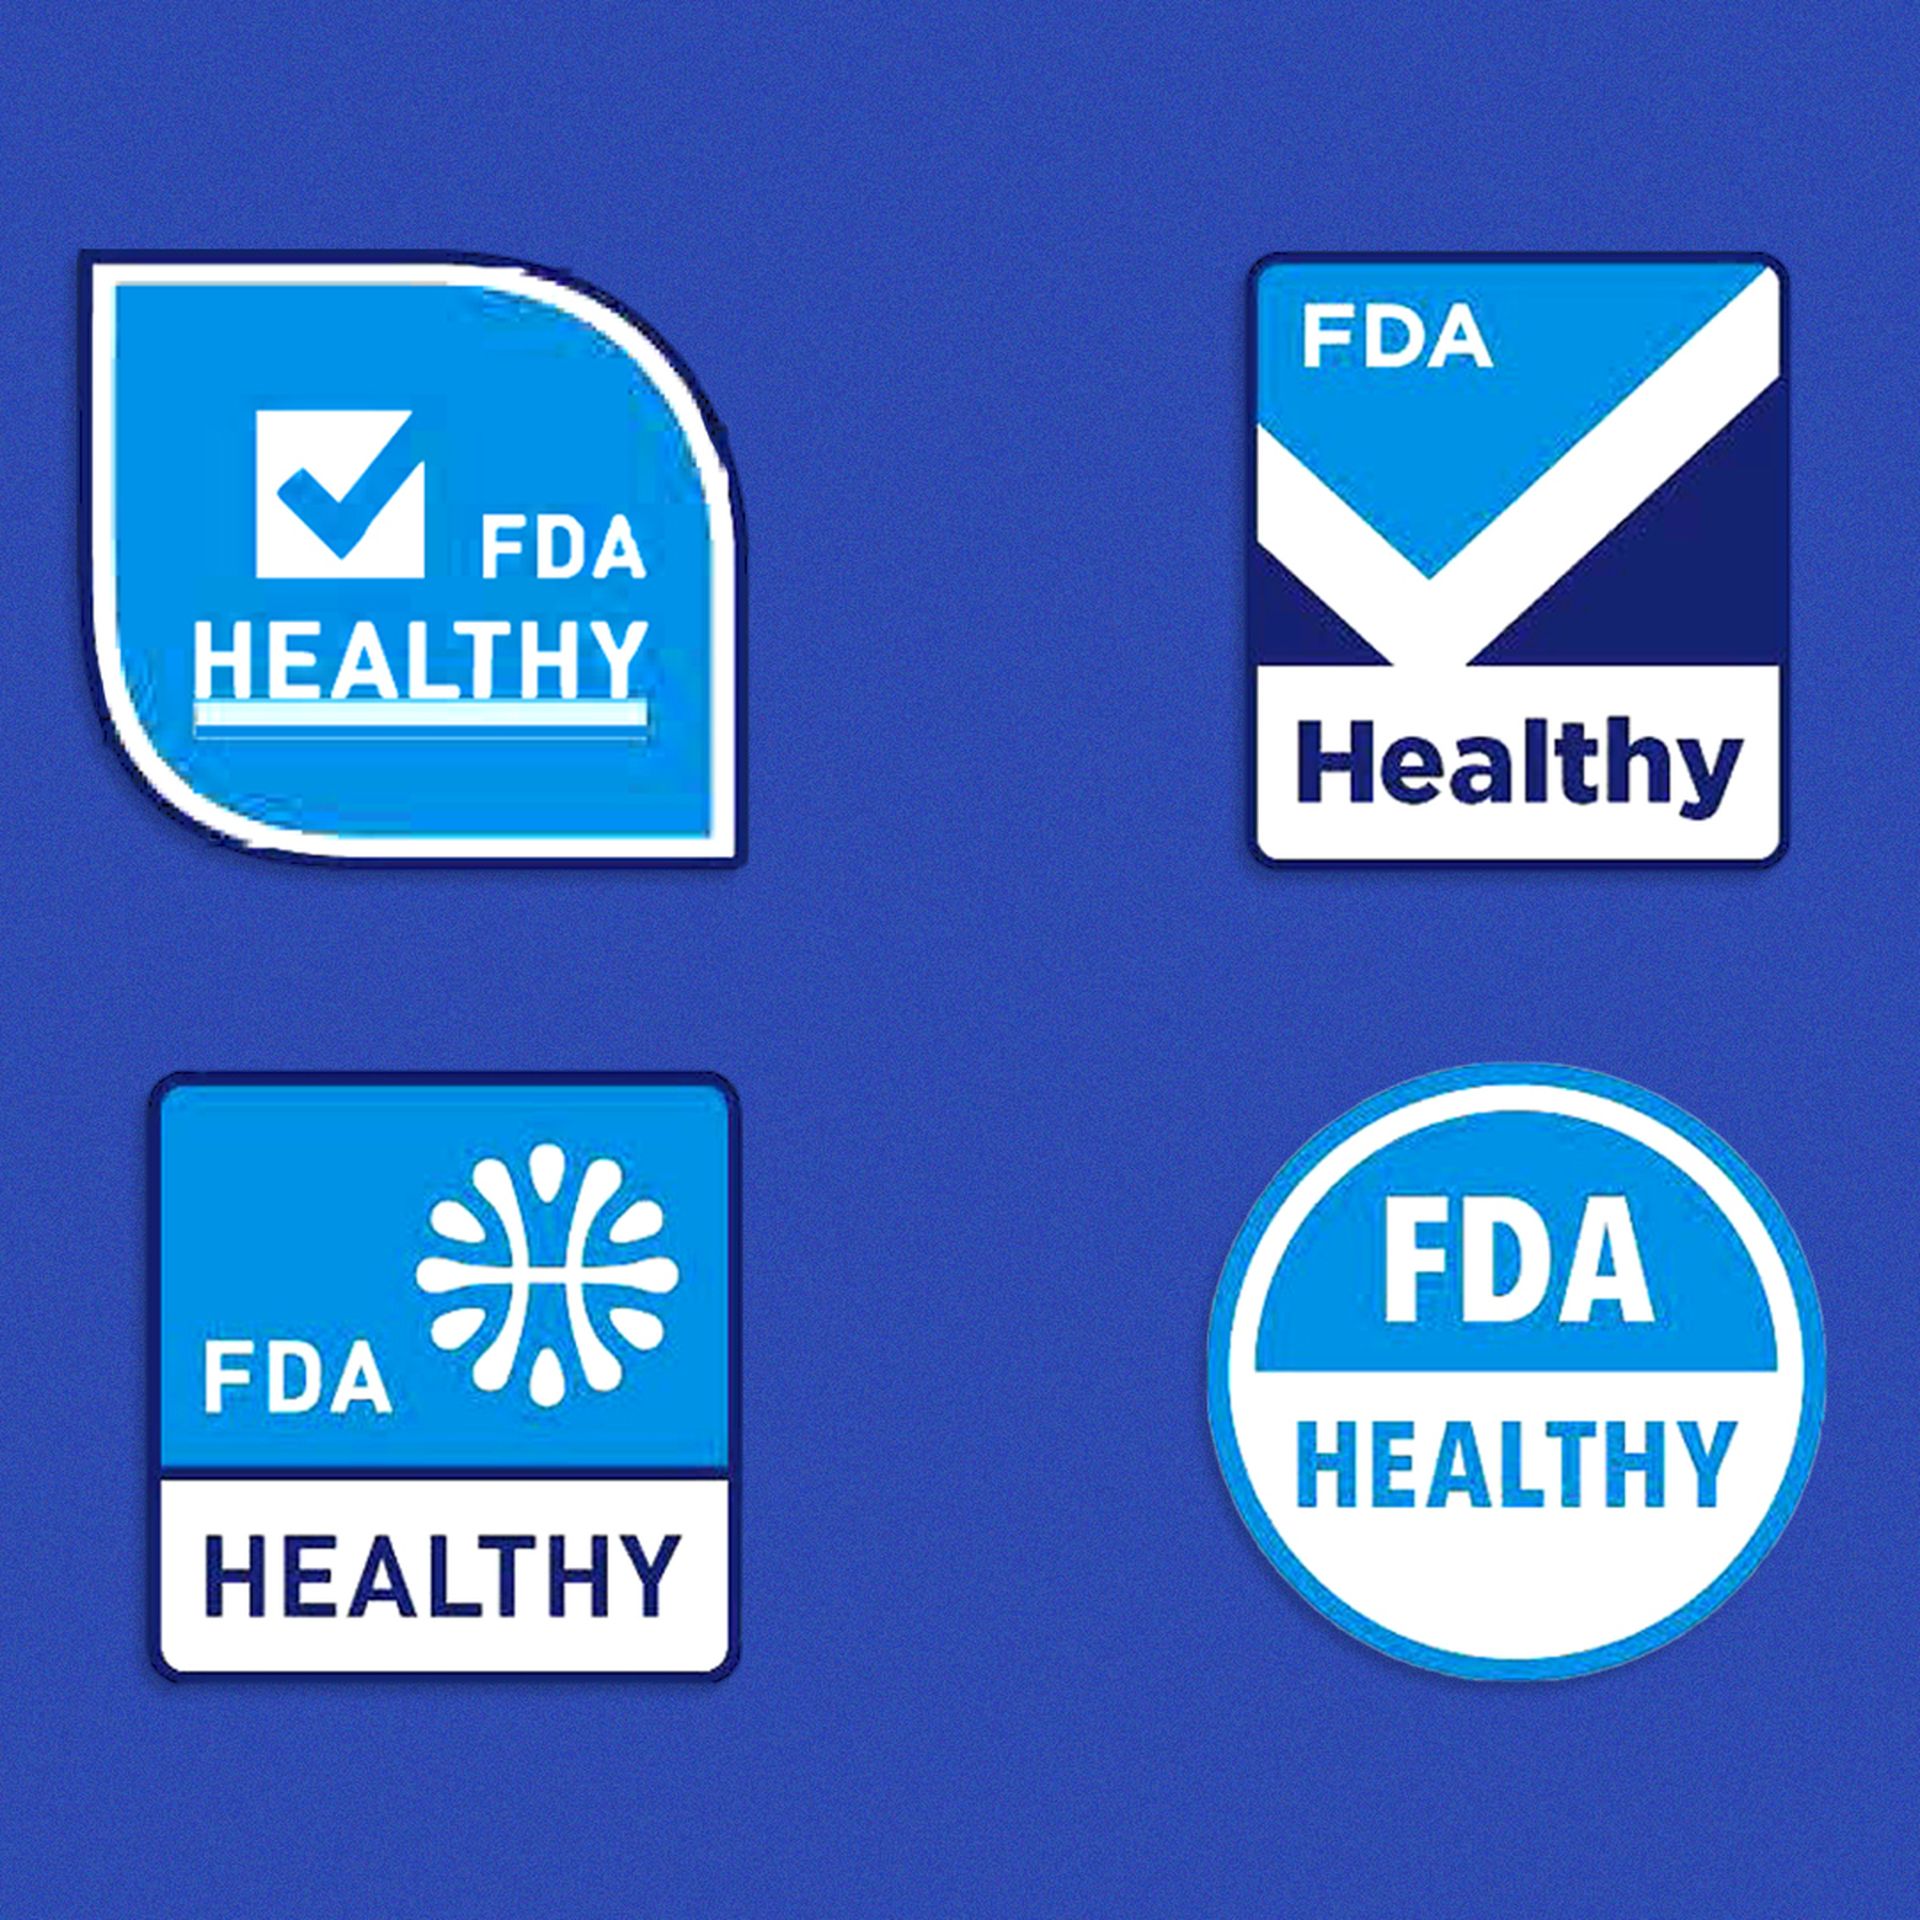 Some of the symbols the FDA is considering to denote "healthy" food on product packaging.